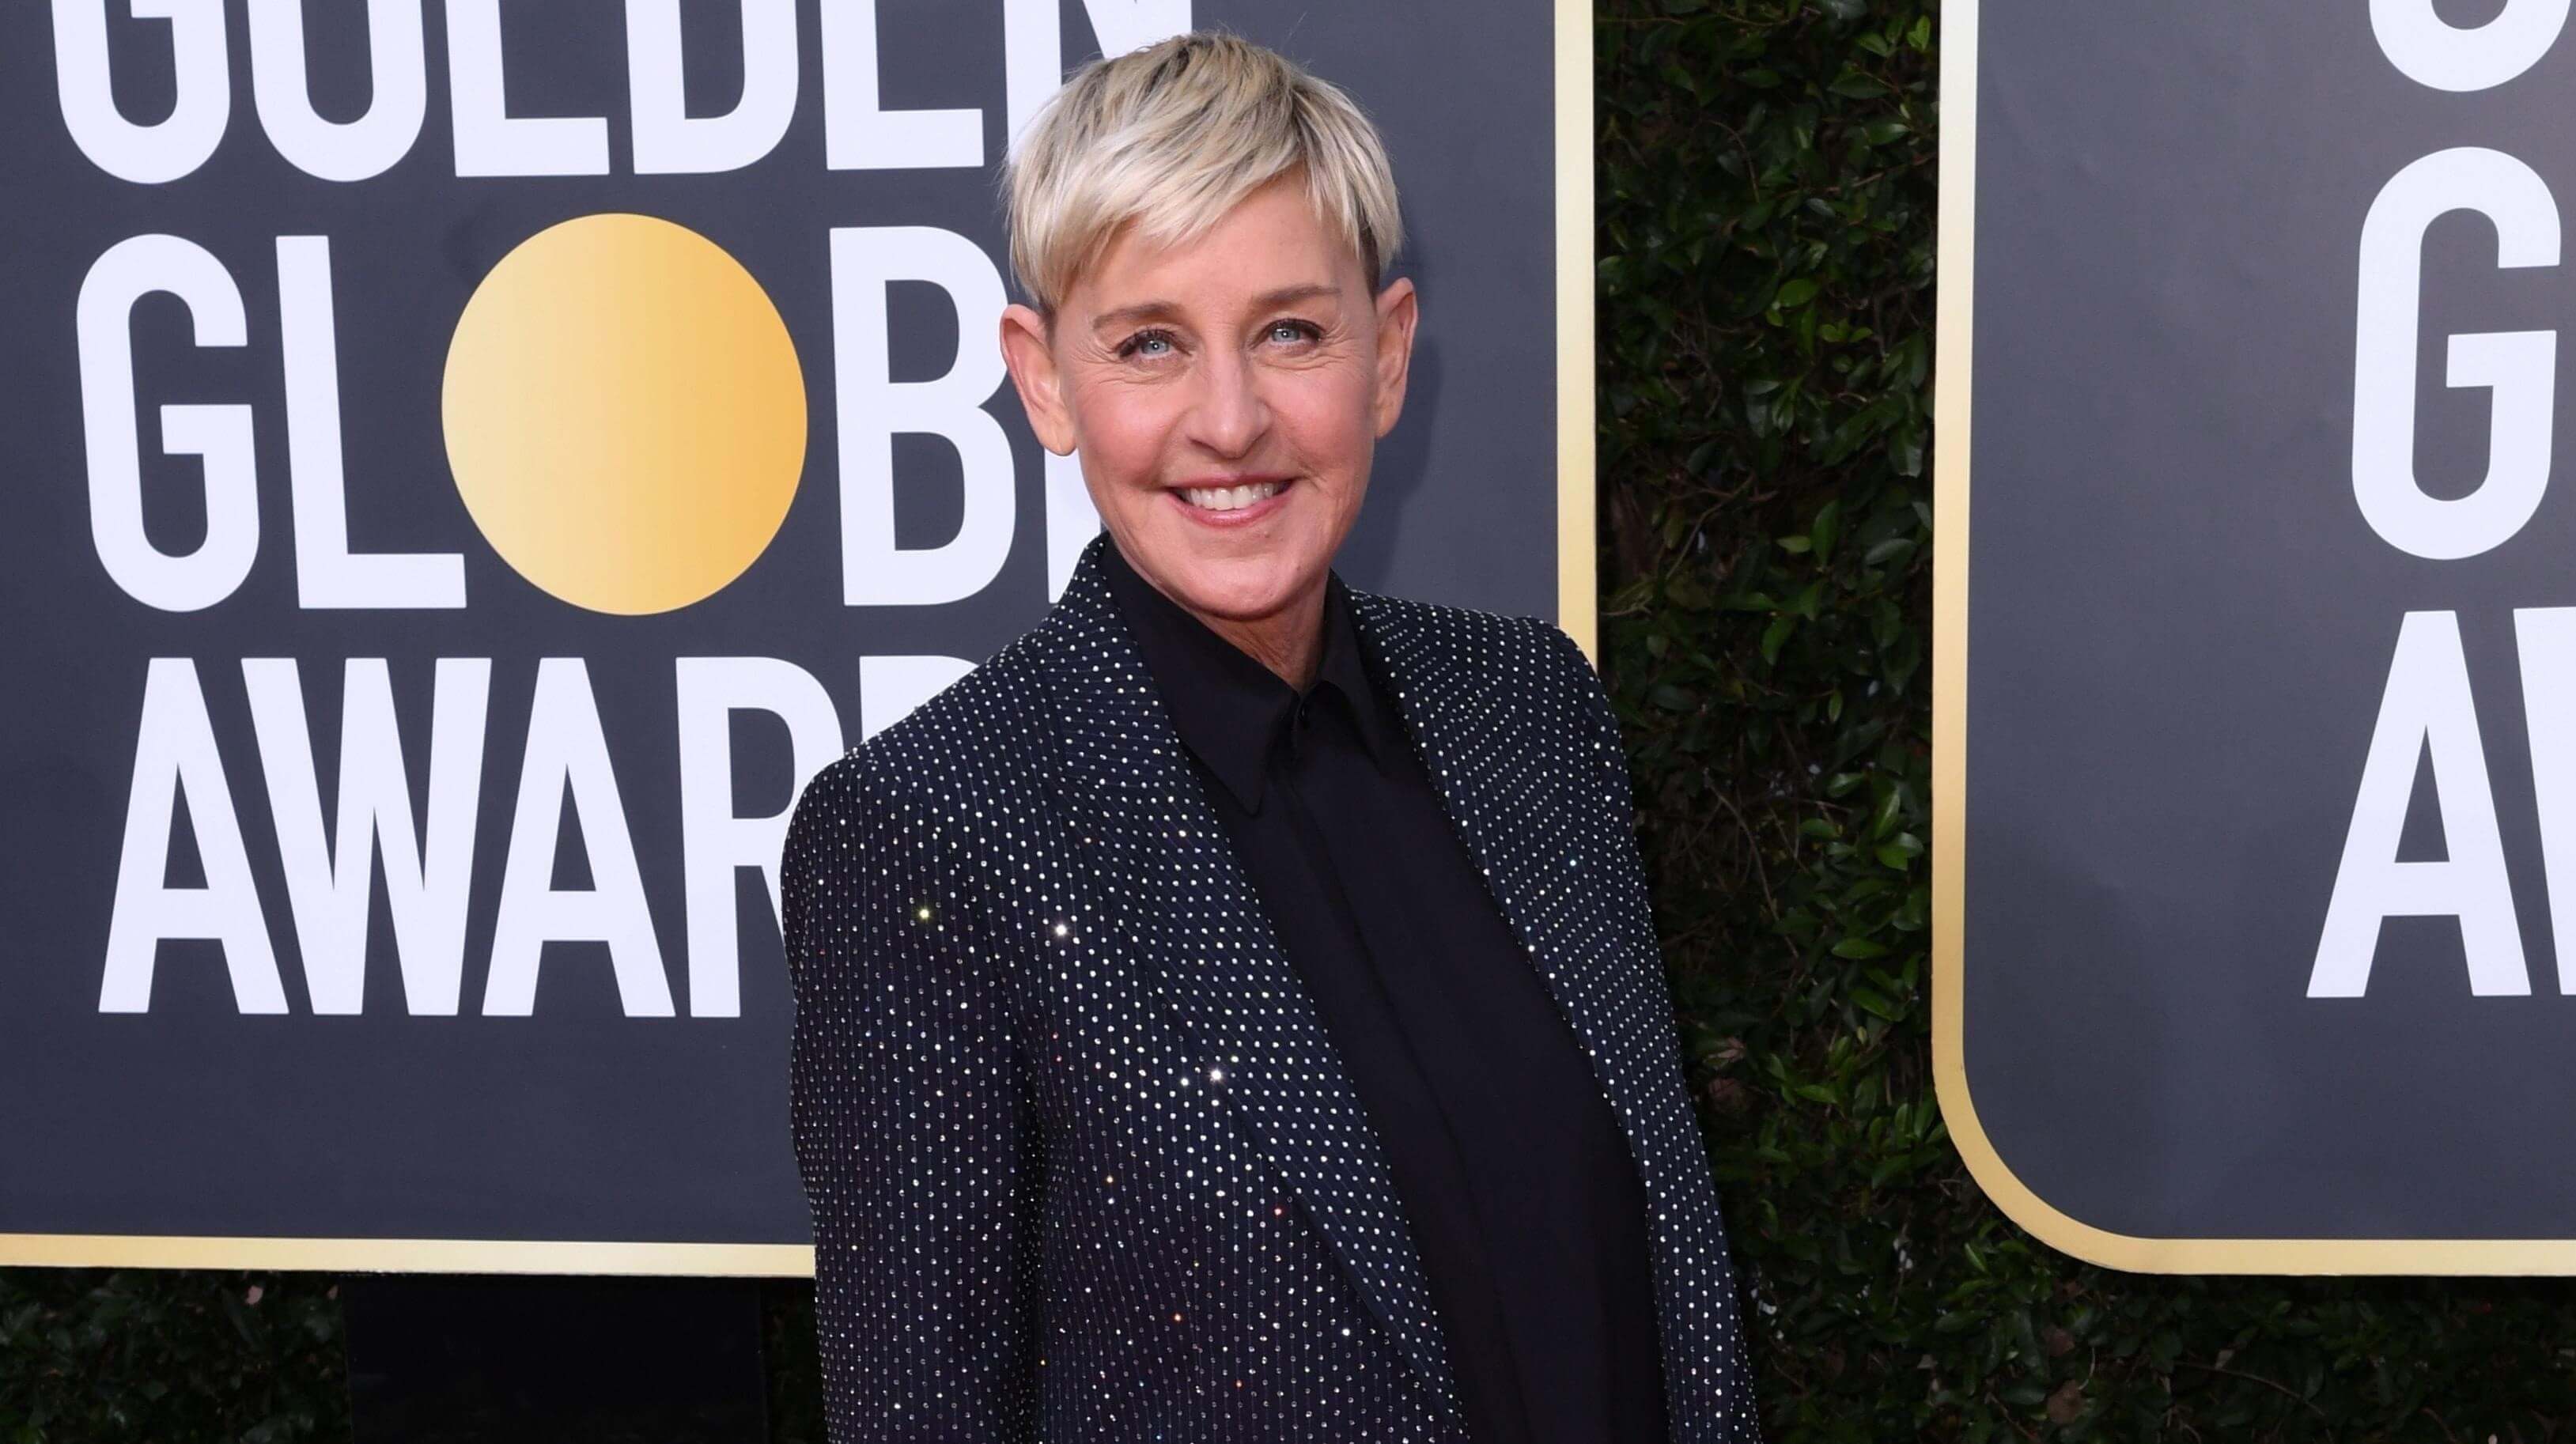 Ellen DeGeneres is “trying to figure out who I am without my show” in first major appearance since cancellation